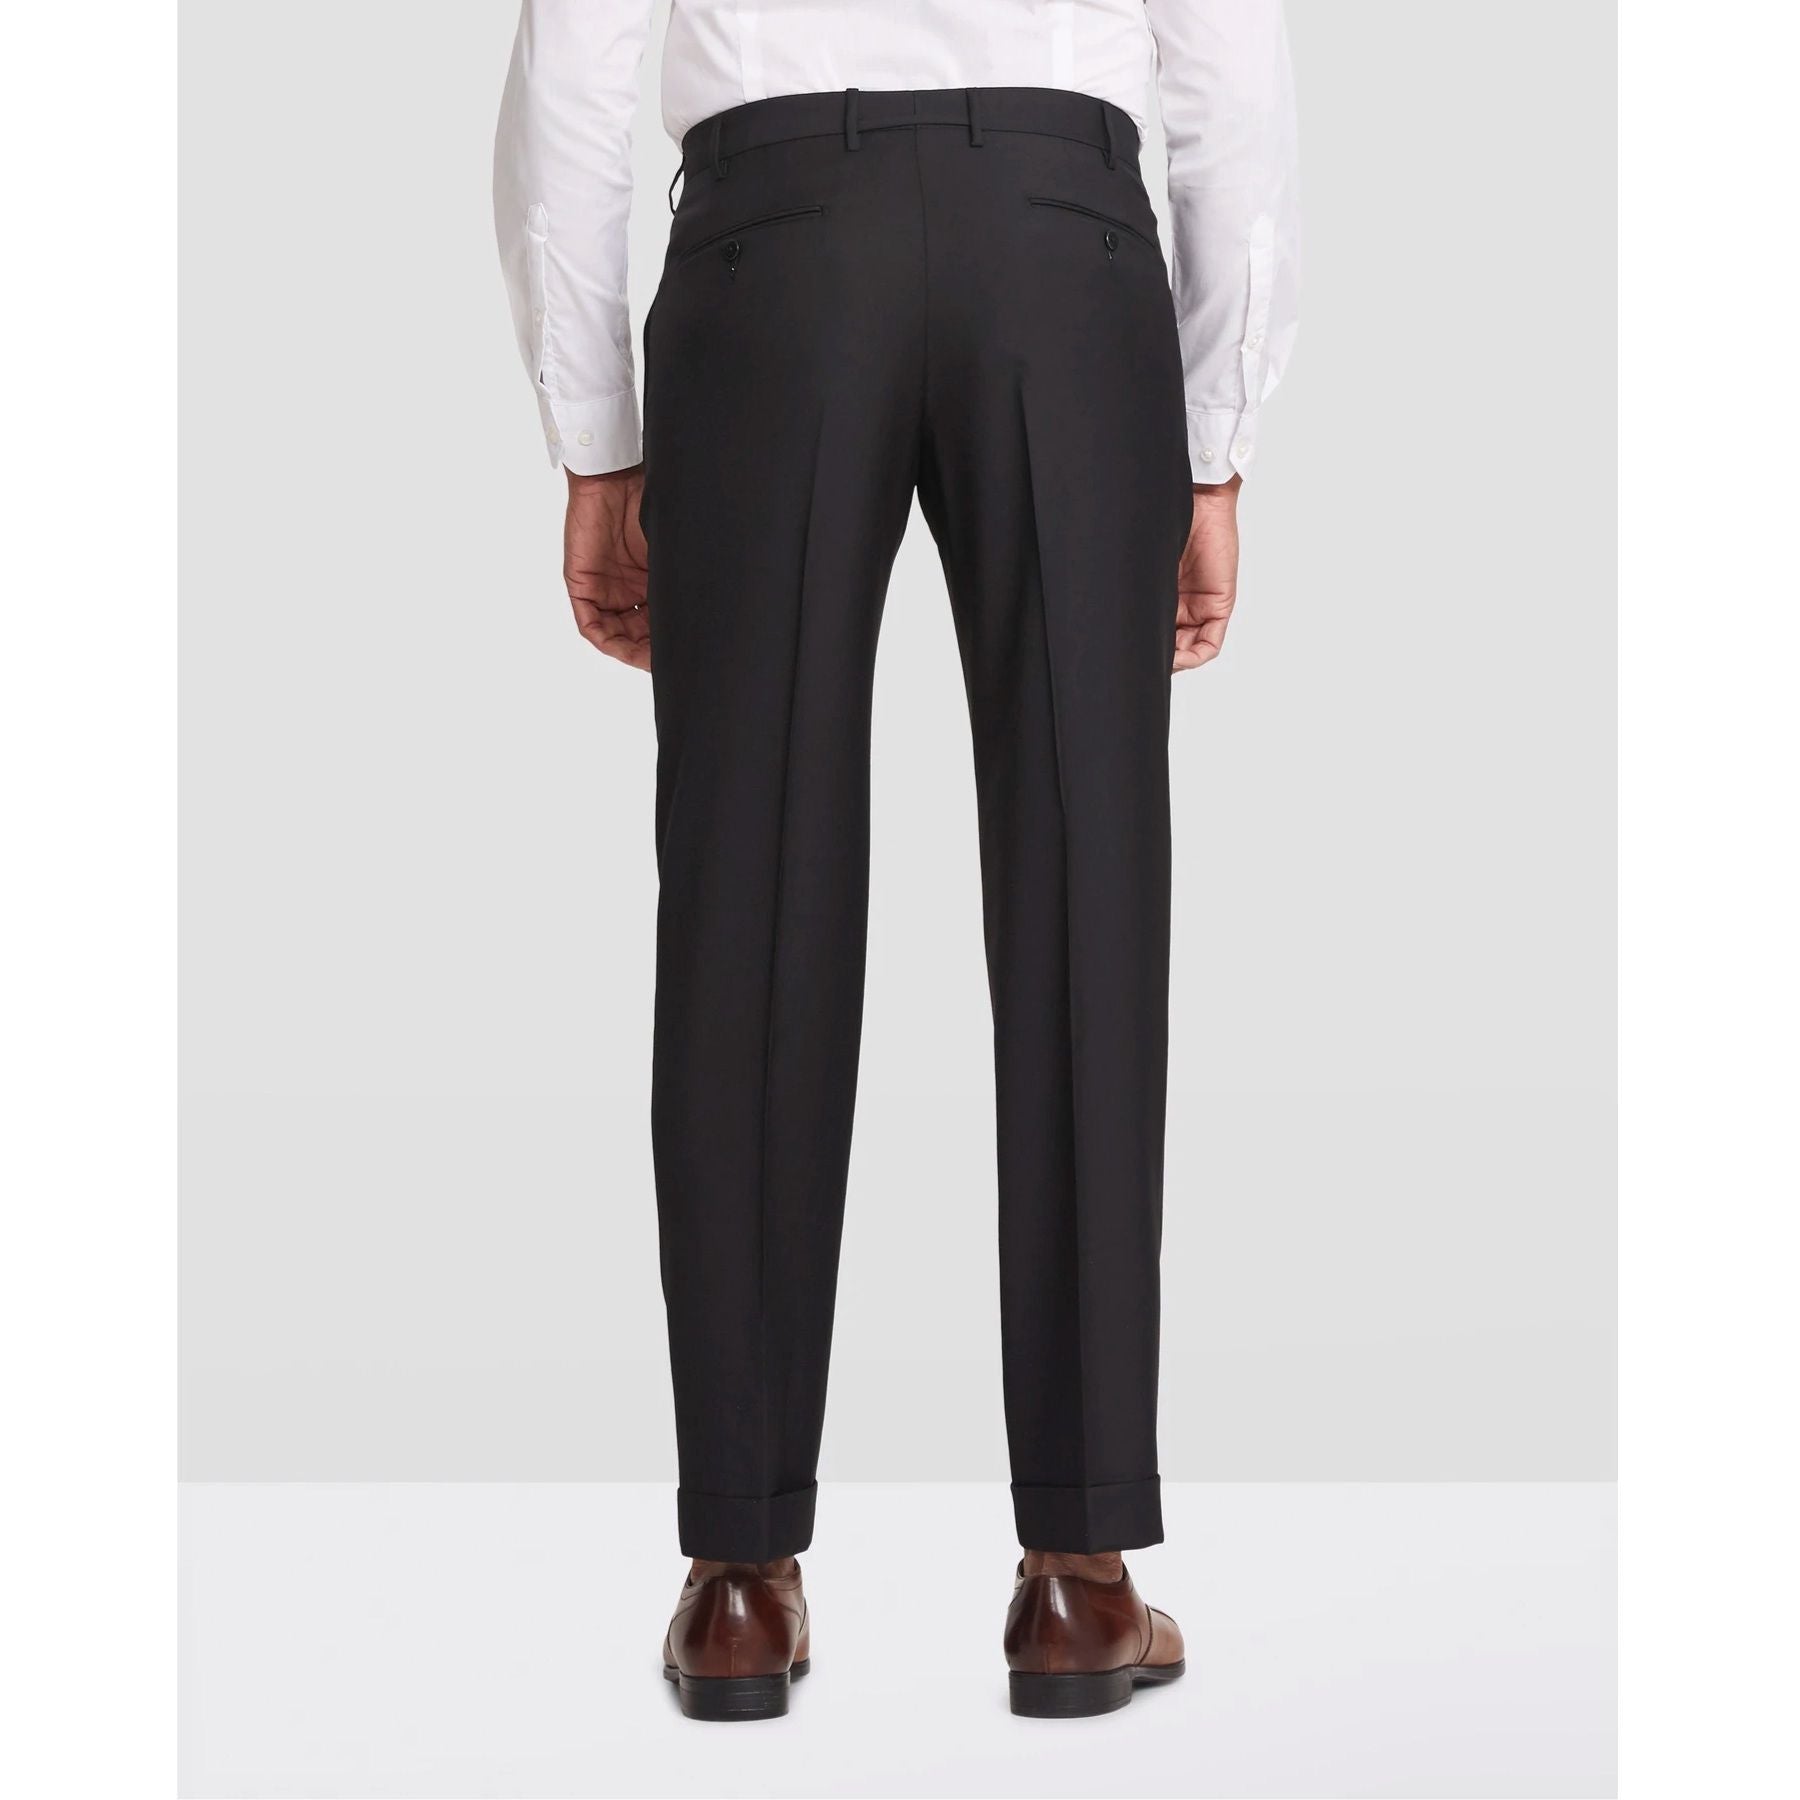 Parker Flat Front Stretch Wool Trouser in Black (Modern Straight Fit) by Zanella